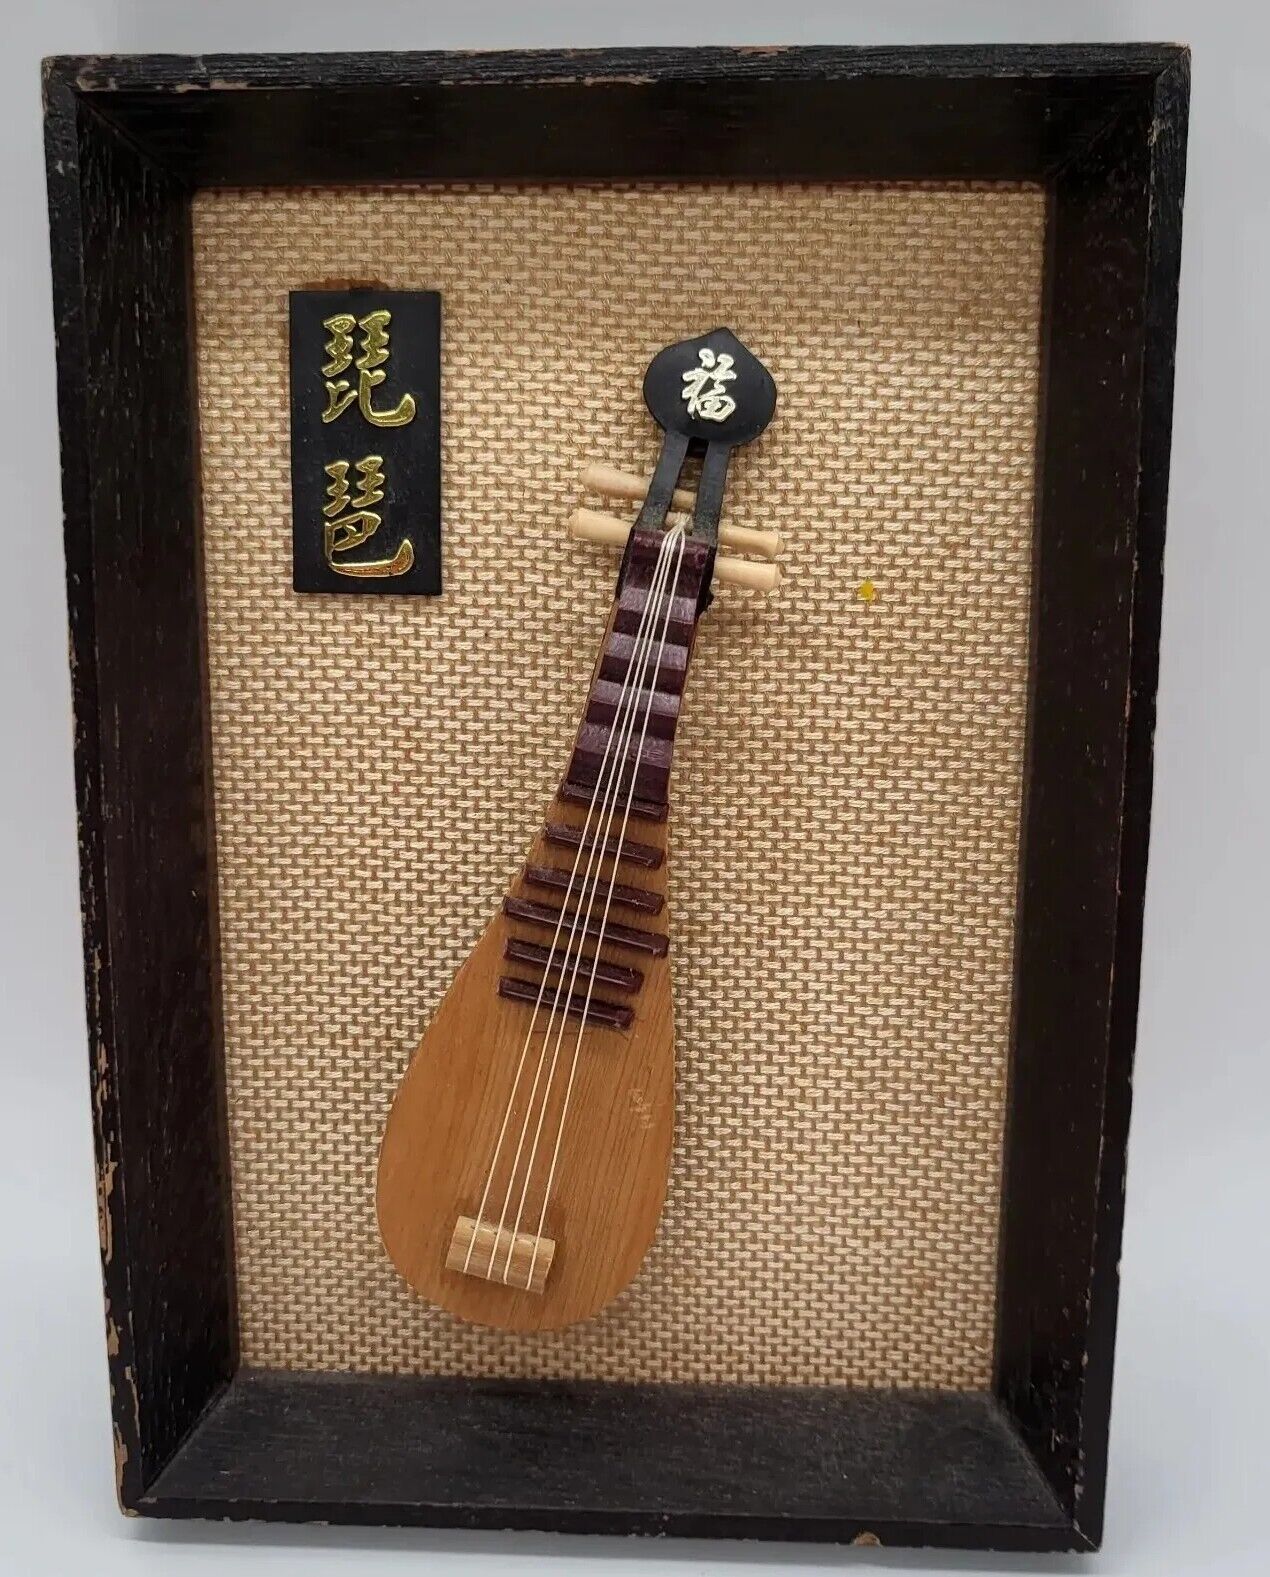 Vintage Wooden Shadow Box. Miniature Chinese Musical Instrument Balloon Guitar.